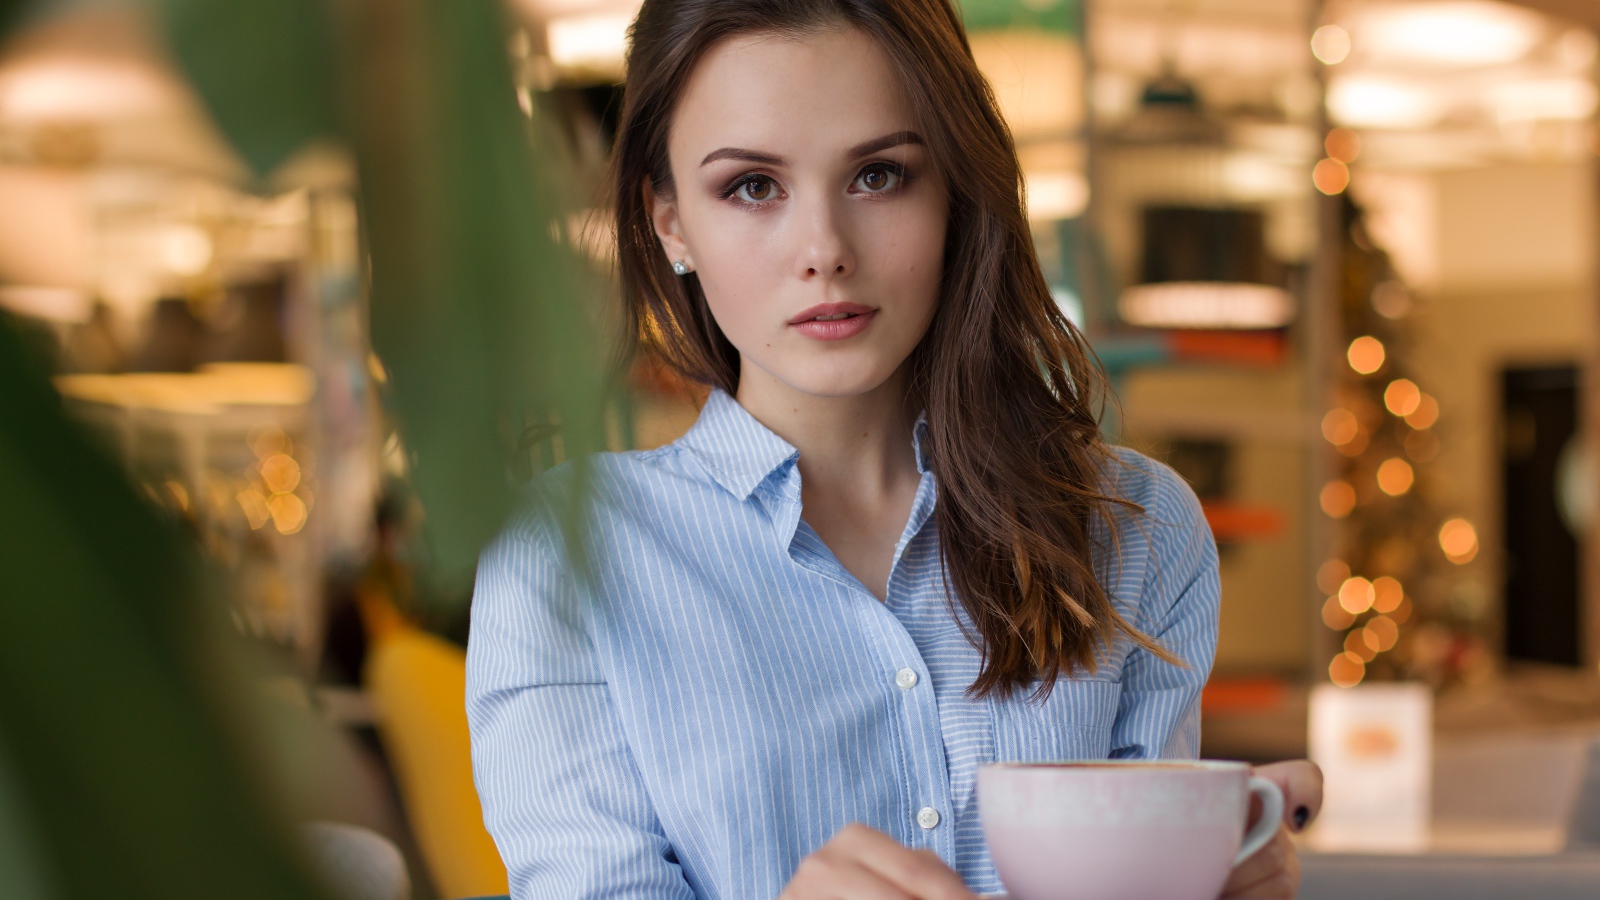 Girl in a blue shirt with a cup of coffee on a table in a cafe